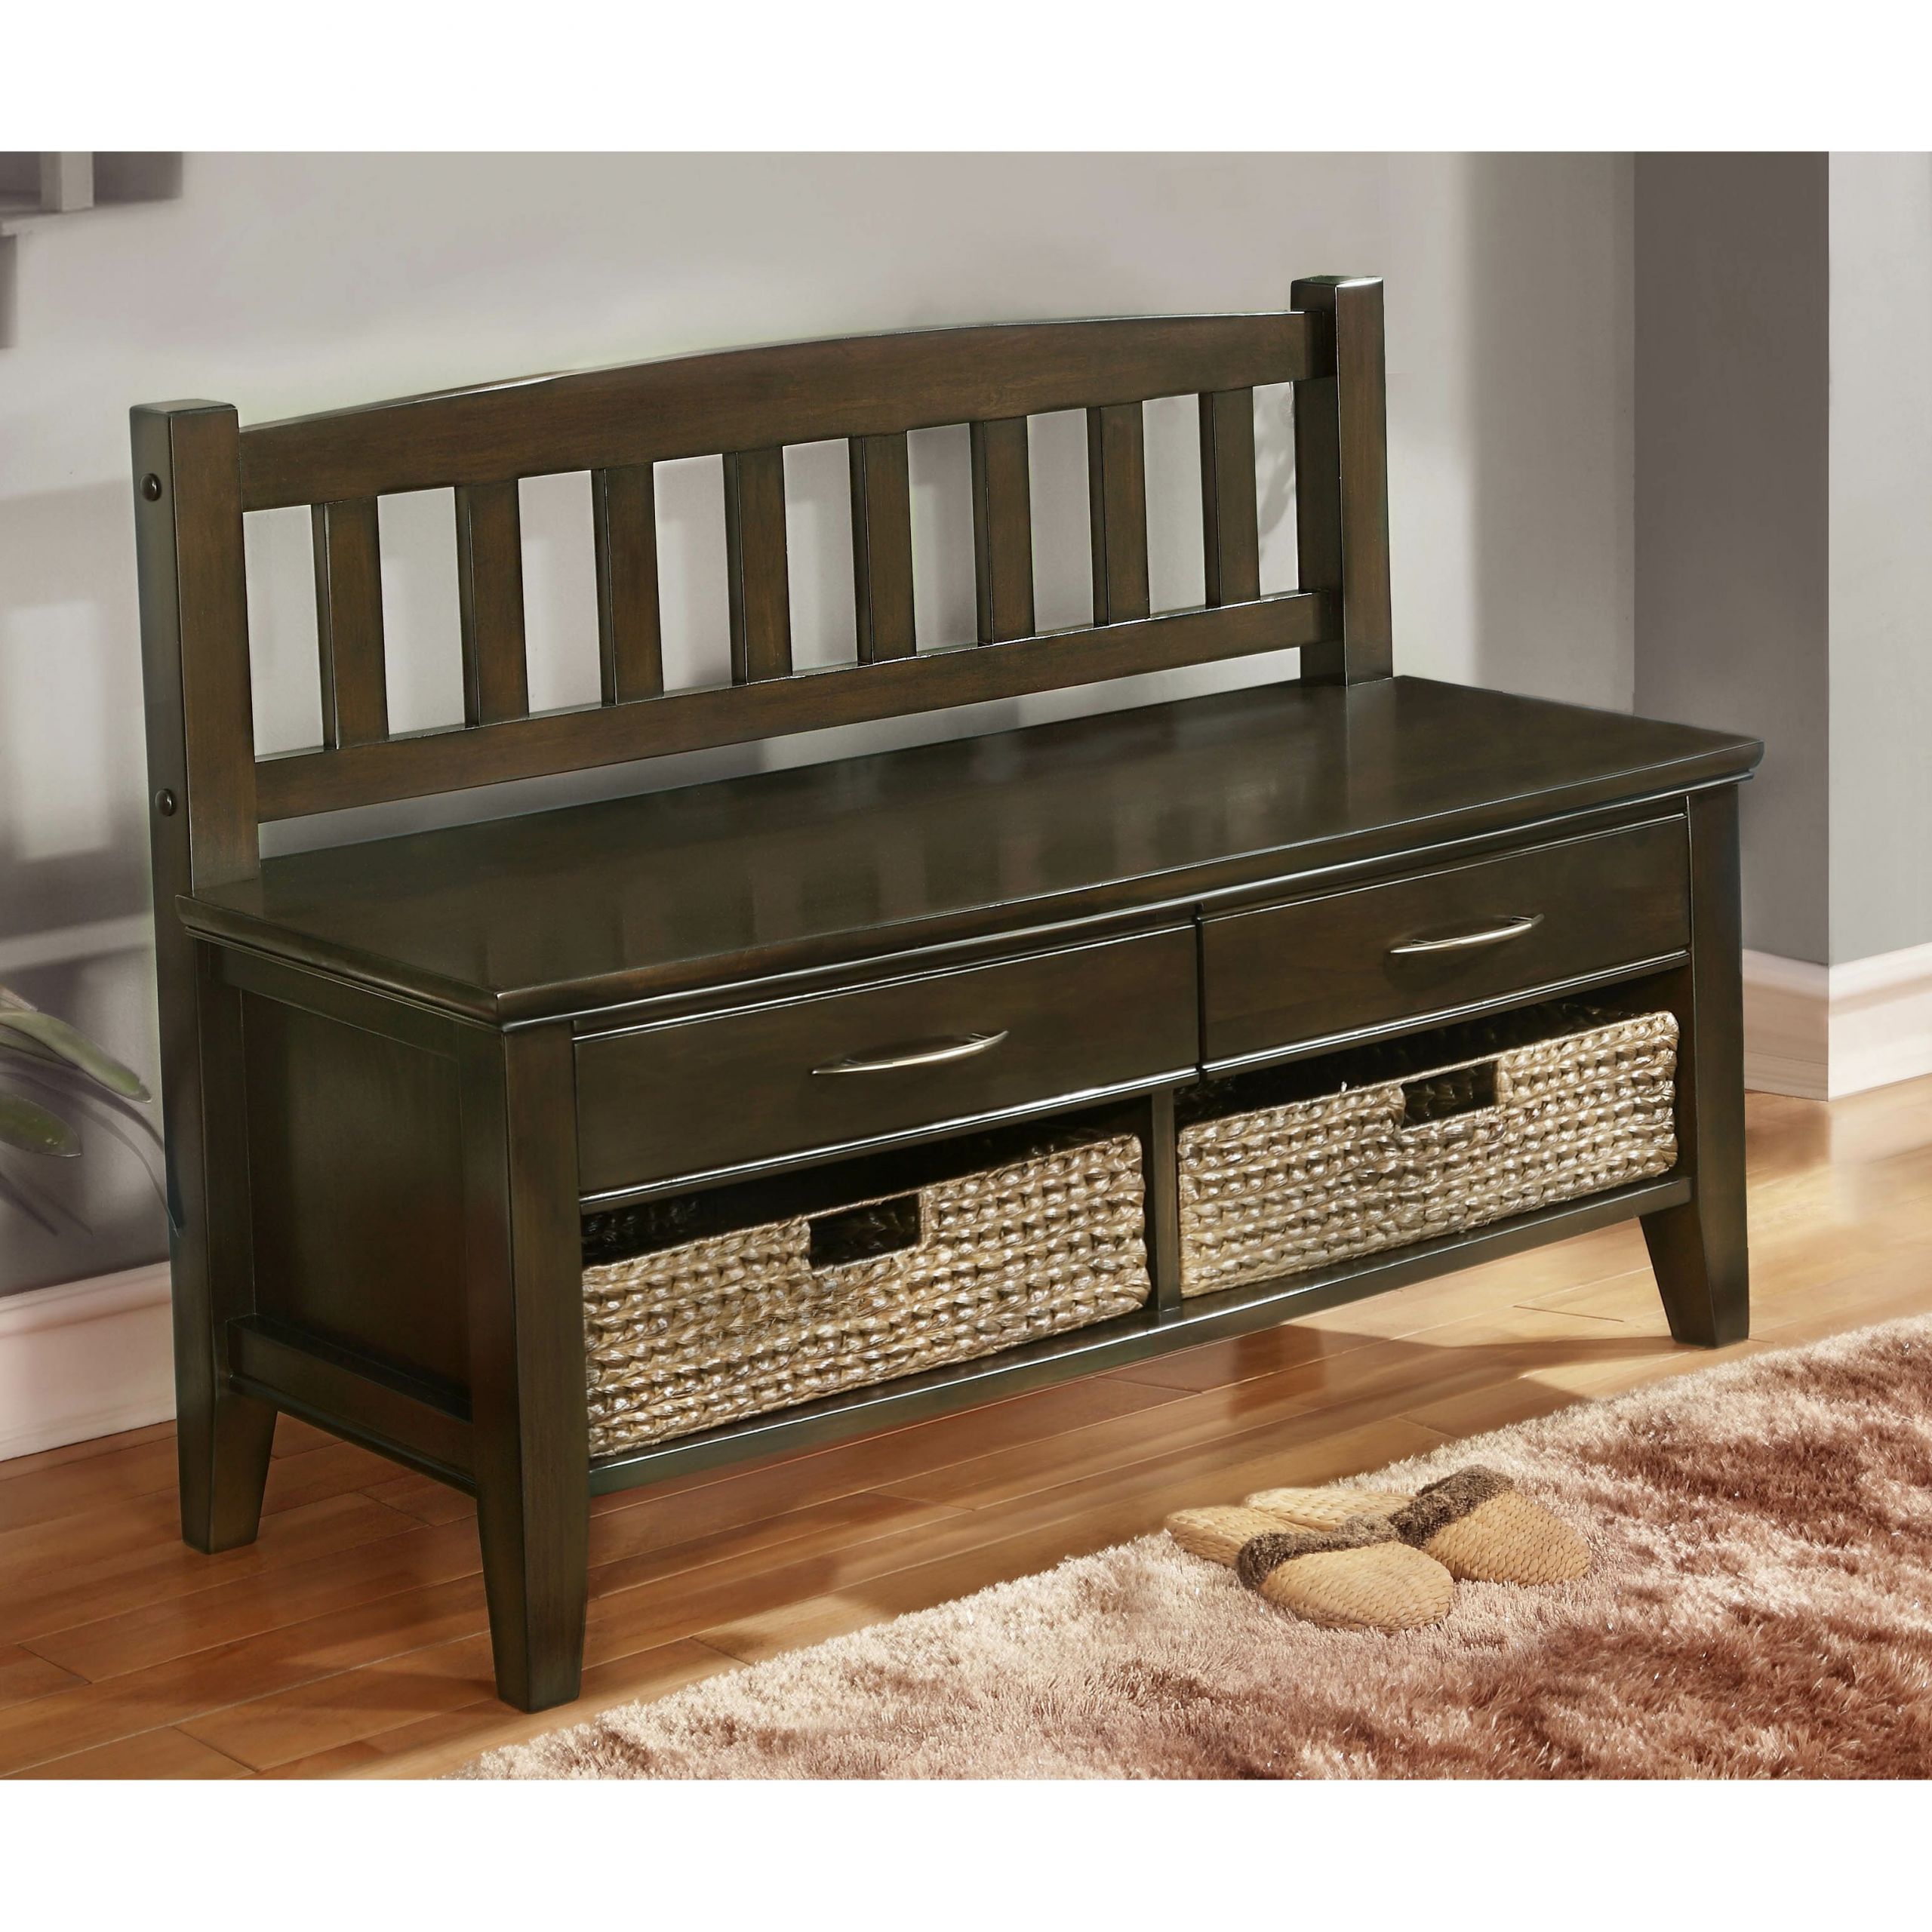 Bench For Entryway With Storage
 Williamsburg Wood Storage Entryway Bench with Drawers and